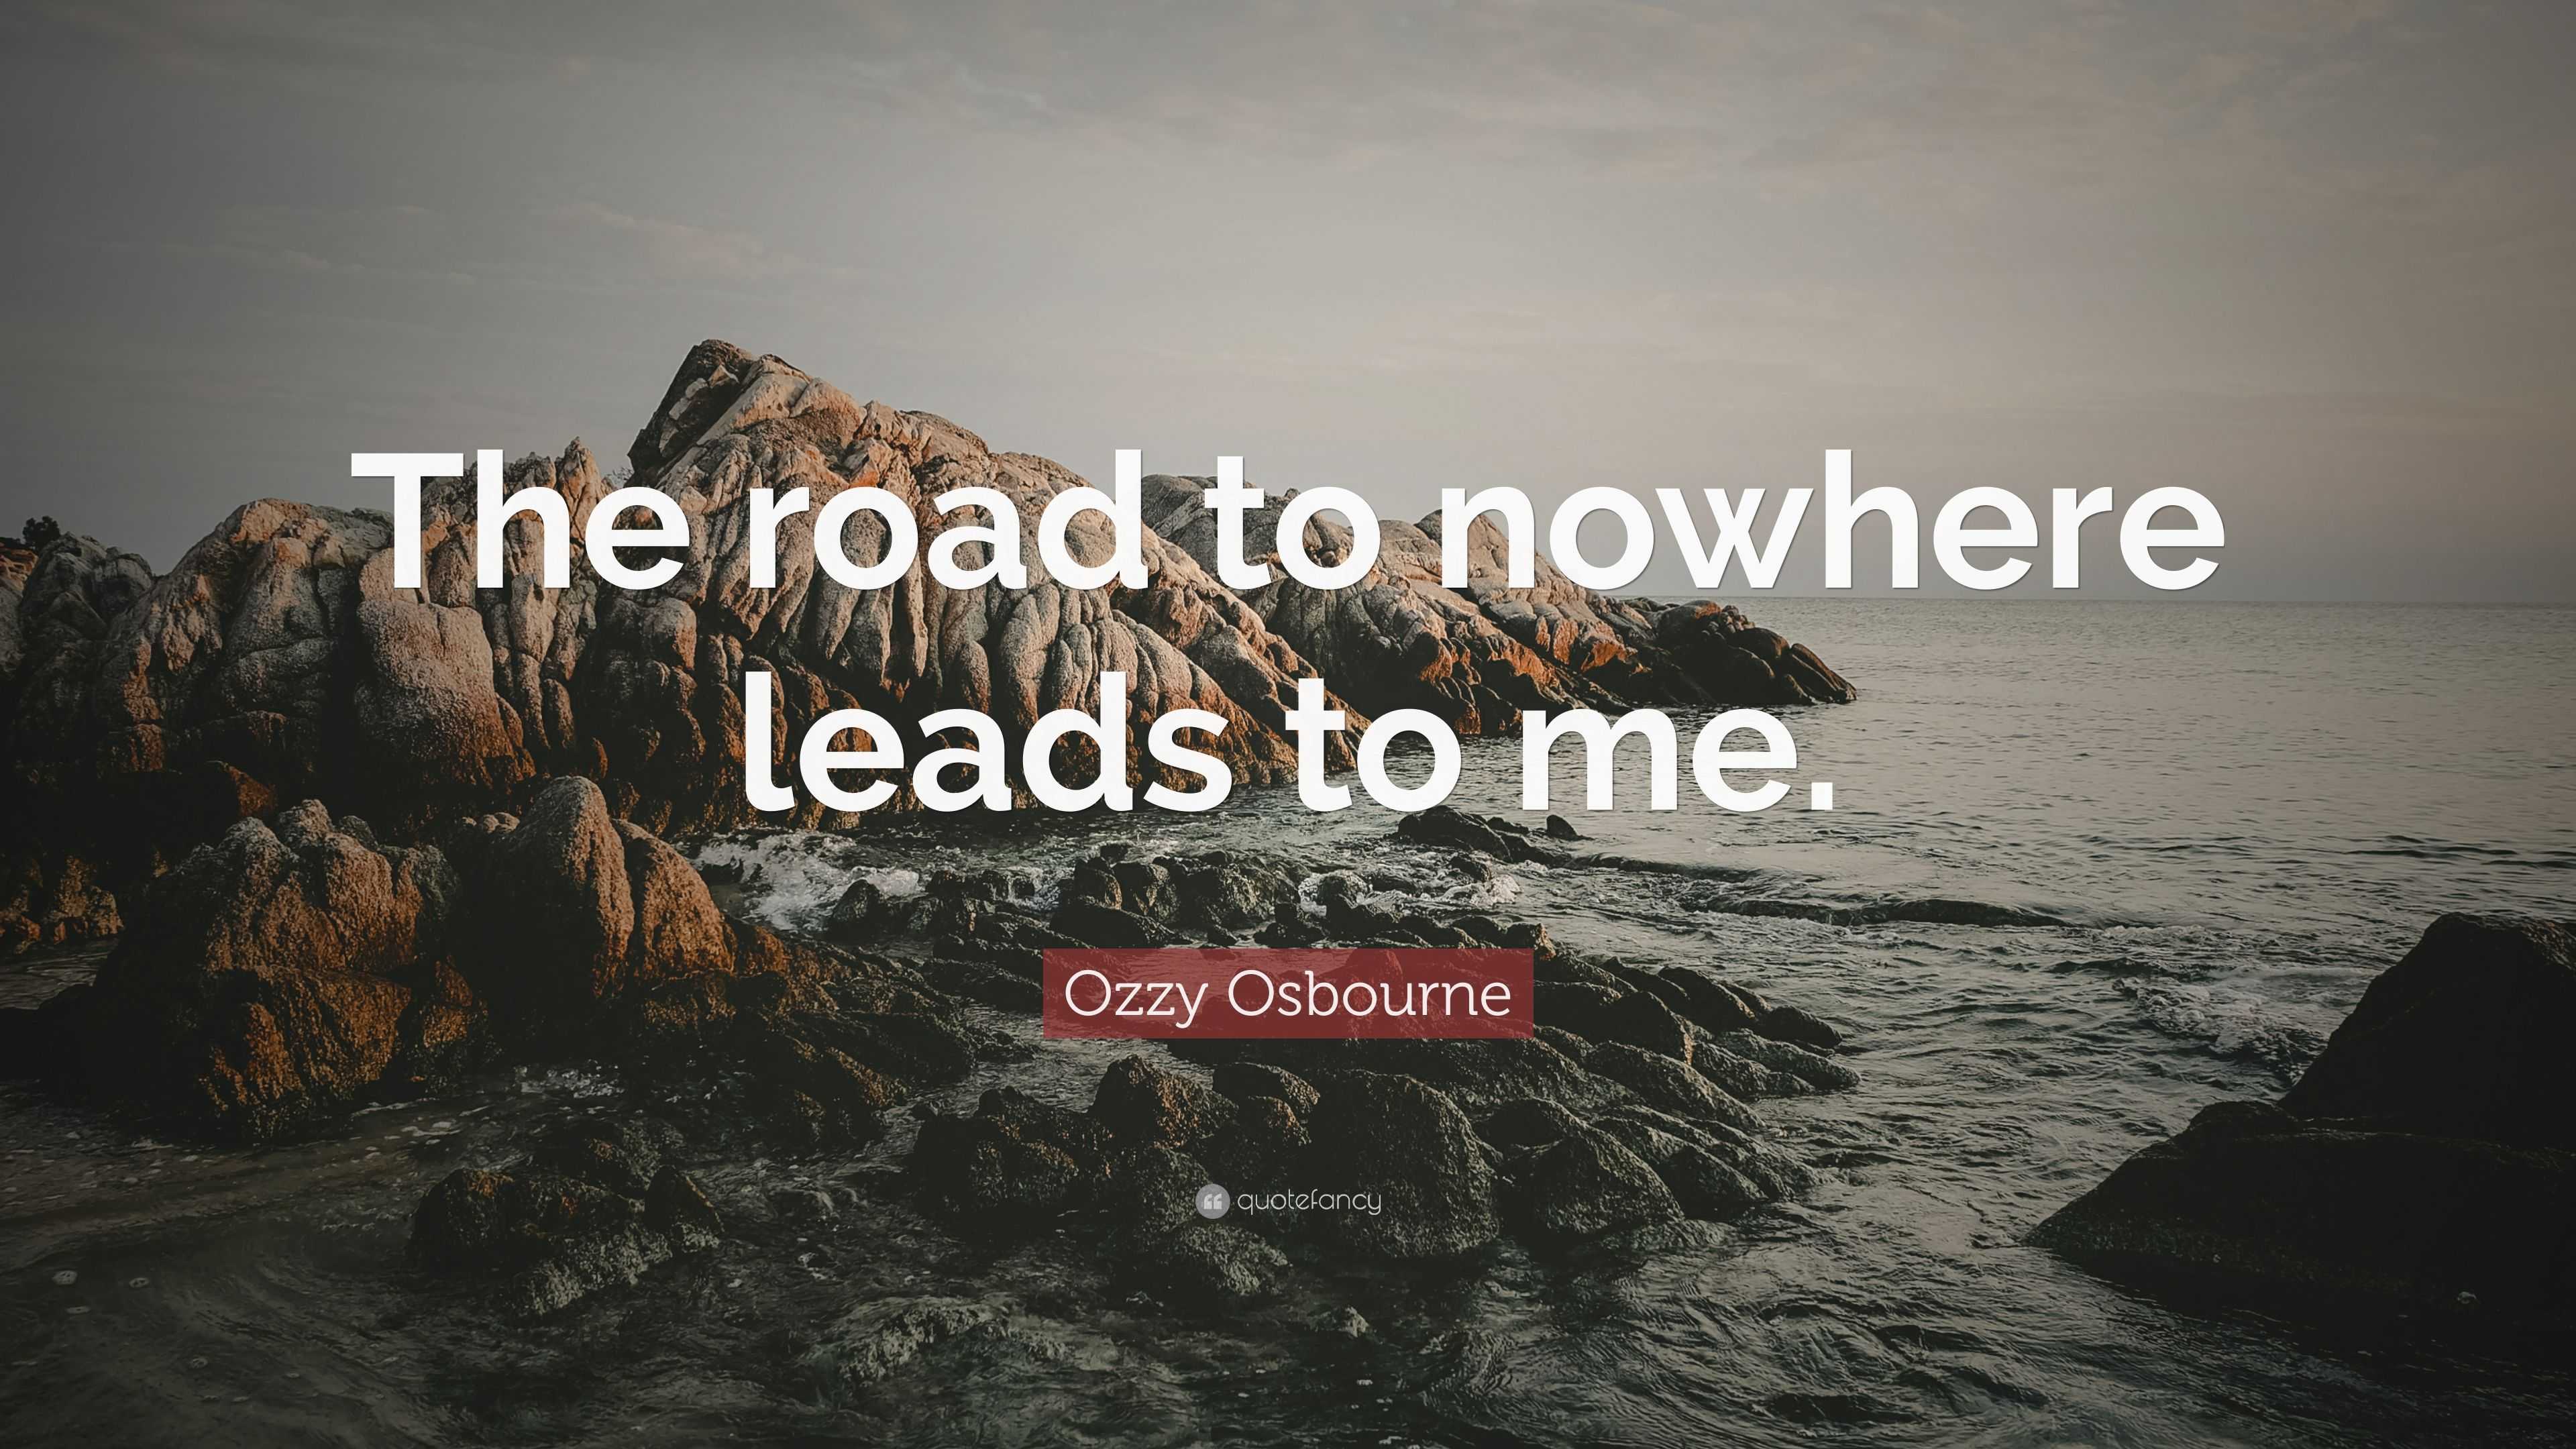 ozzy osbourne the road to nowhere video